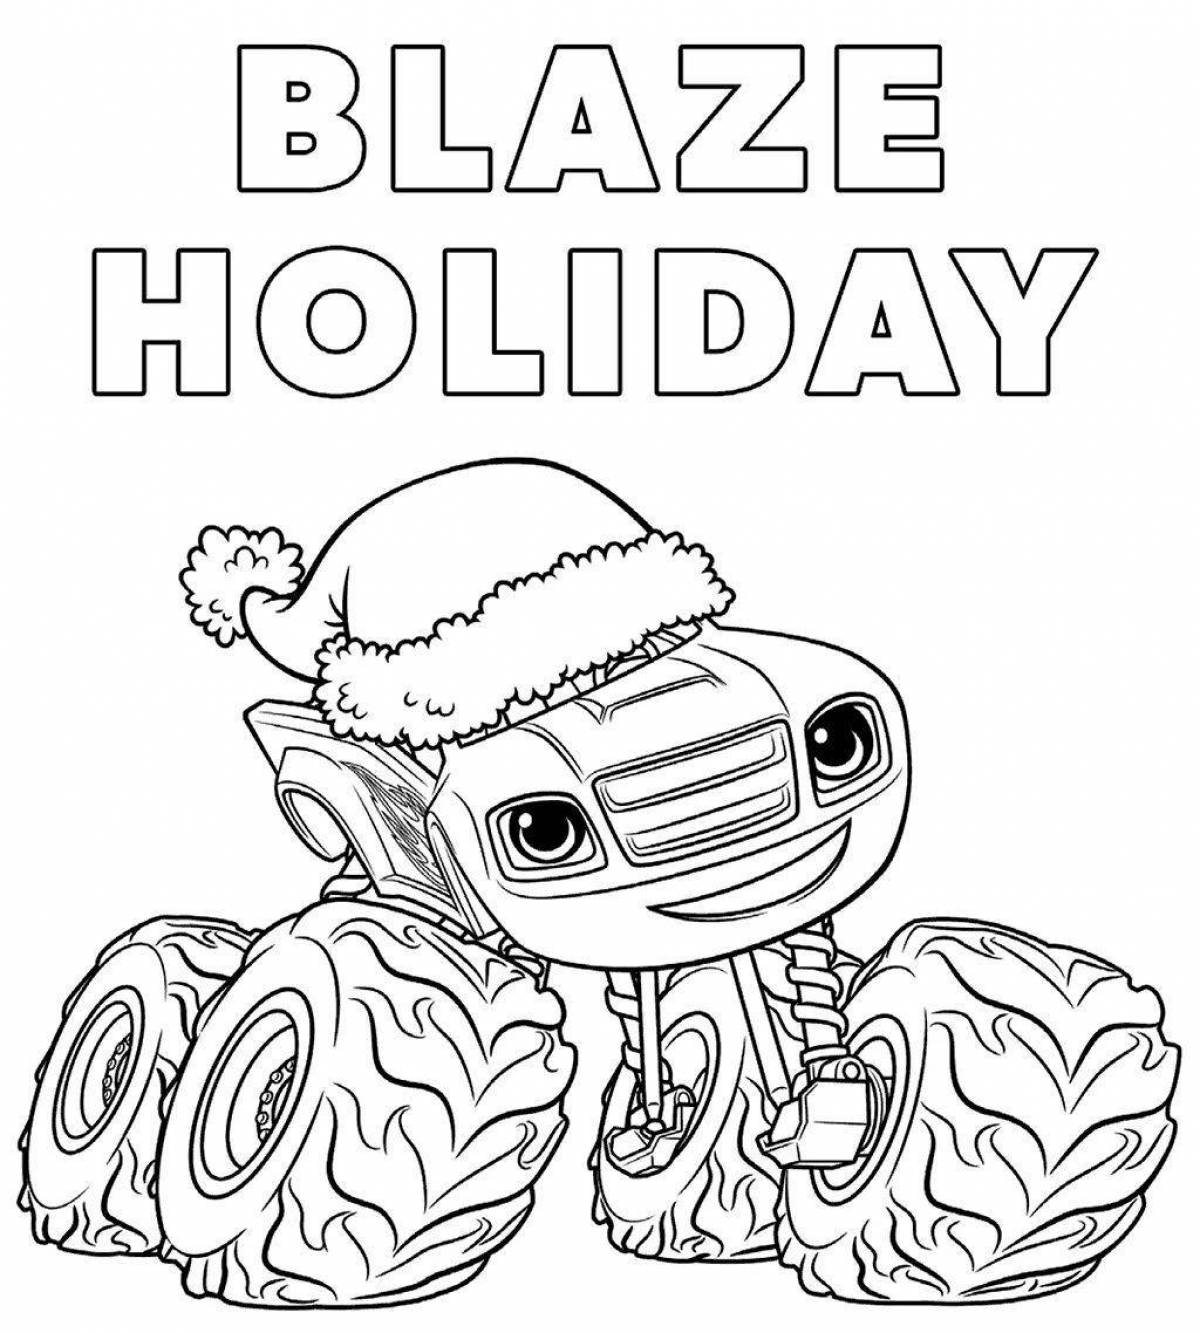 A fun coloring book for kids with flash and wonder cars